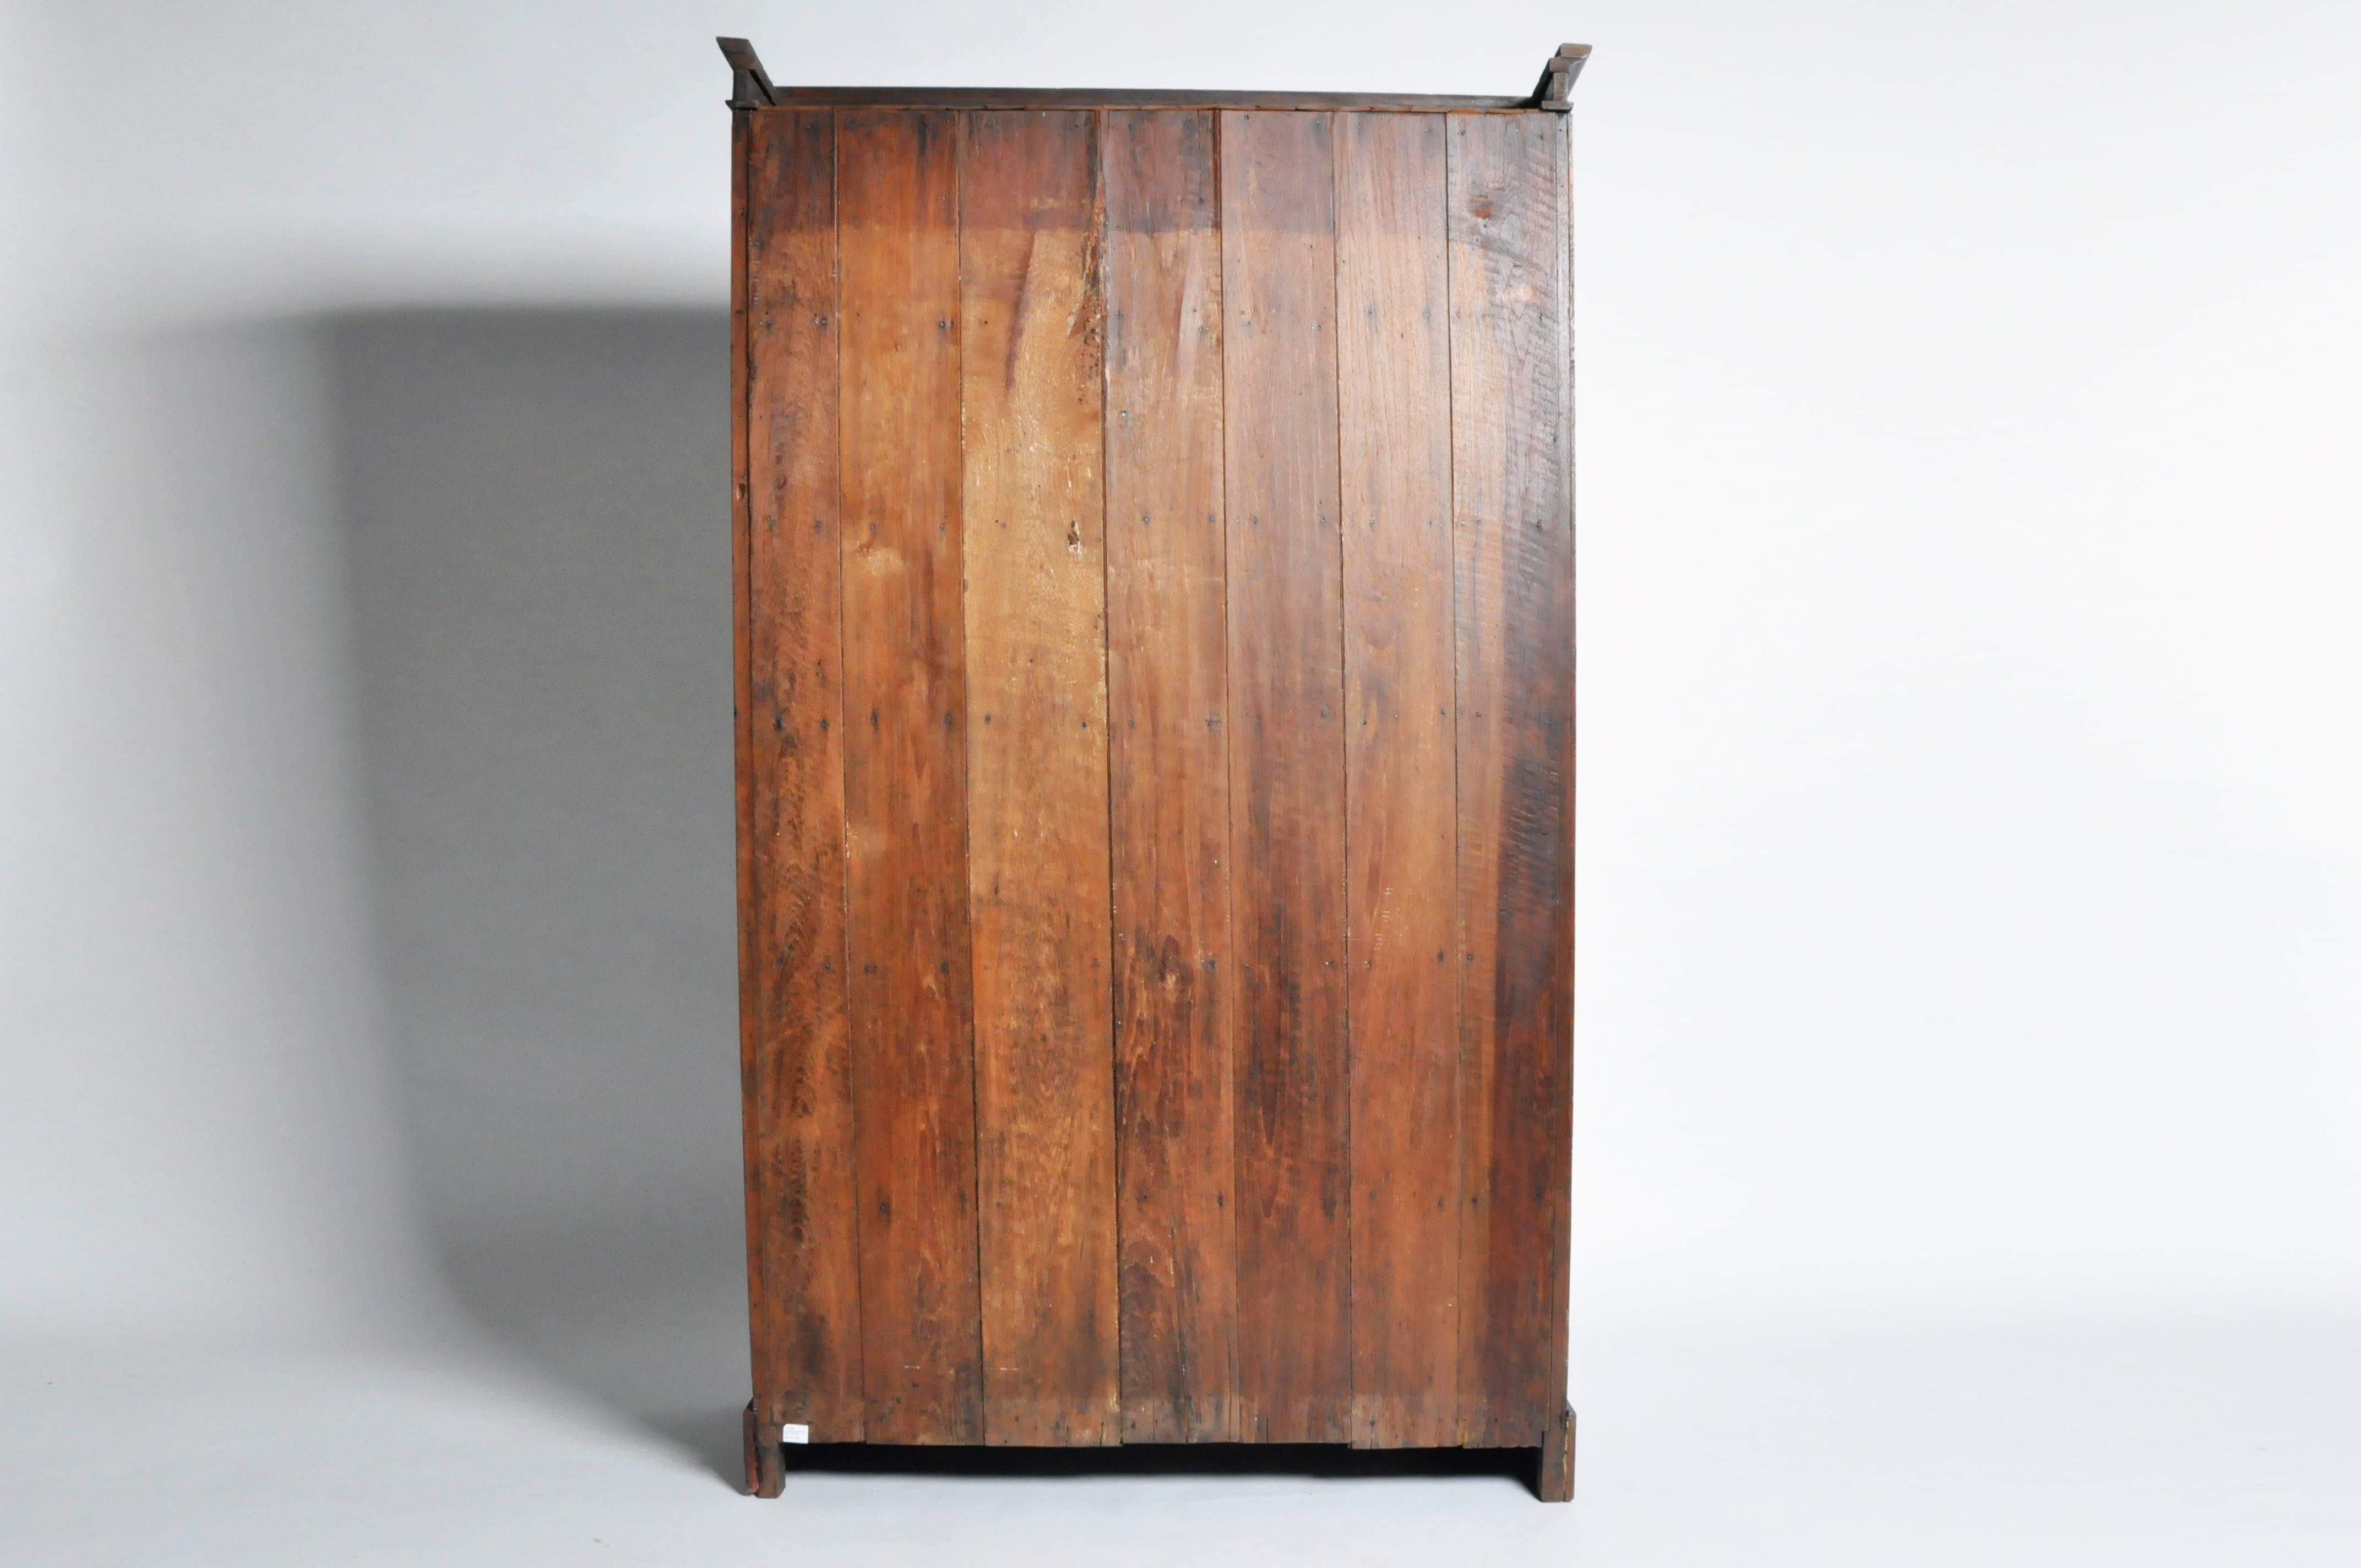 This handsome British Colonial bookcase is from Mandalay, Burma and is made from teak wood, circa mid-1900s. This cabinet comes in two parts, both featuring a set of sliding glass panel doors that open to compartments lined with shelves. The